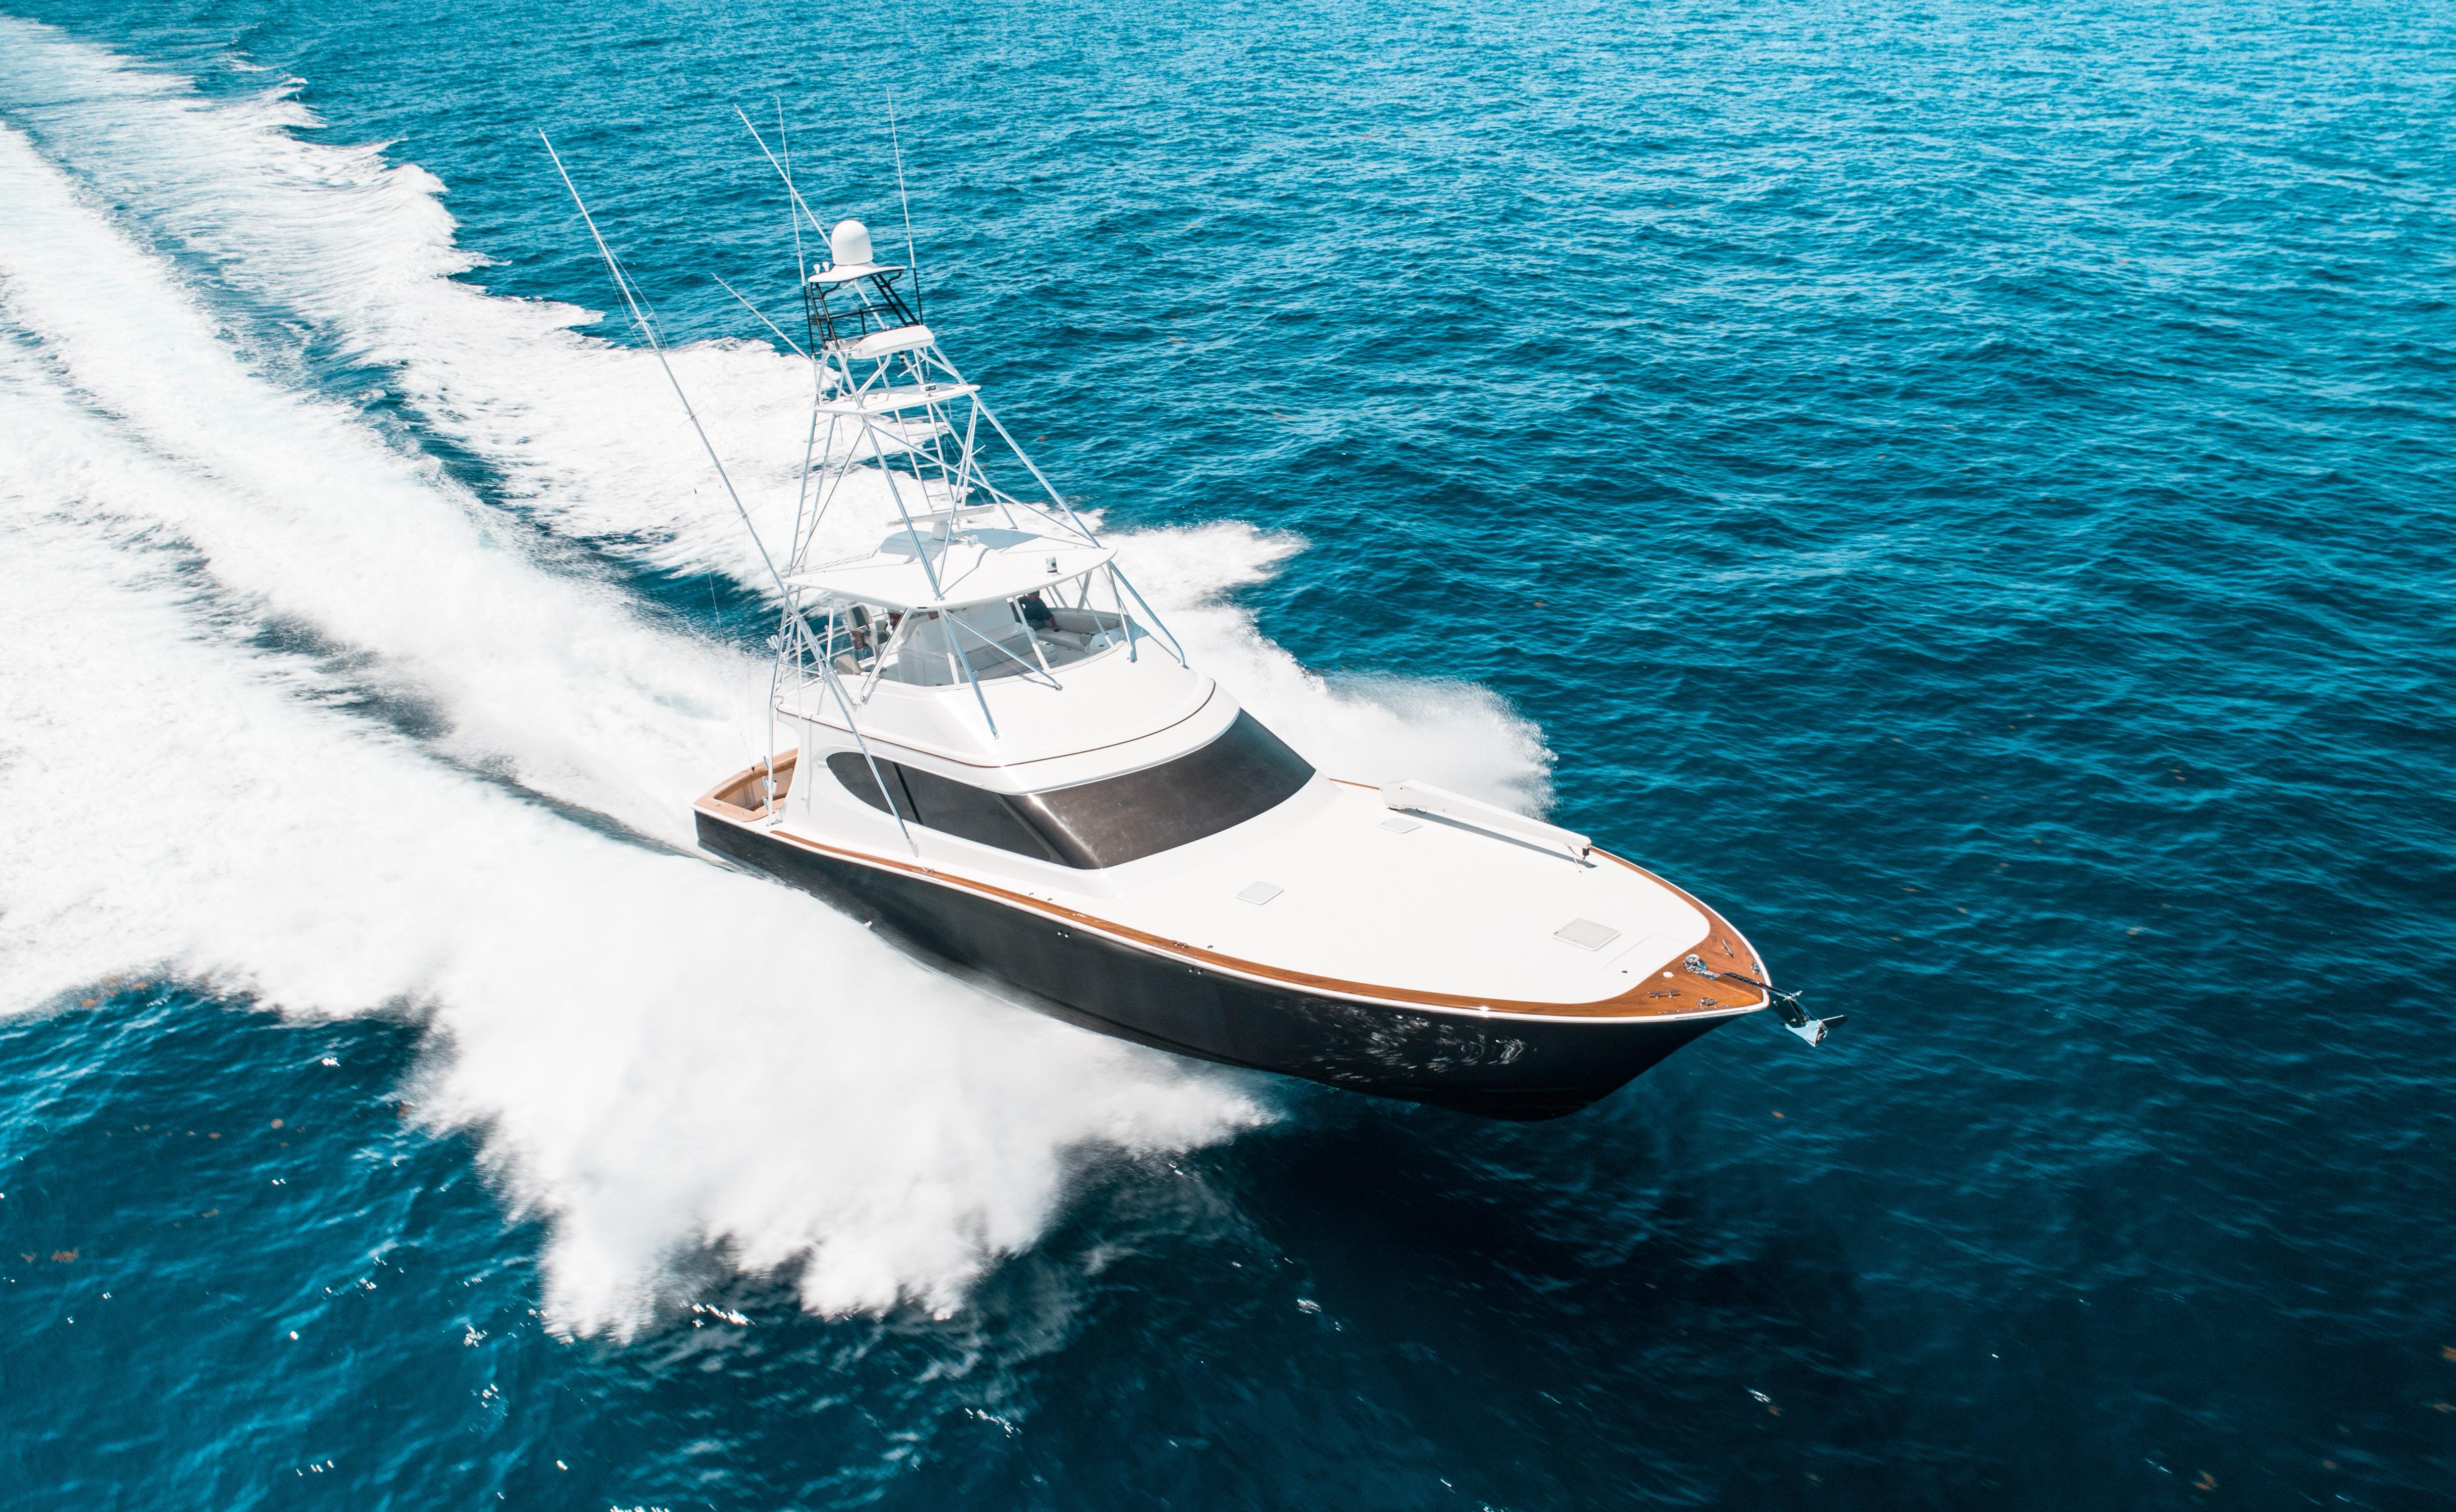 Equivalent Soft feet Forgiving 2017 Hatteras GT 70 Convertible Boat for sale - YachtWorld